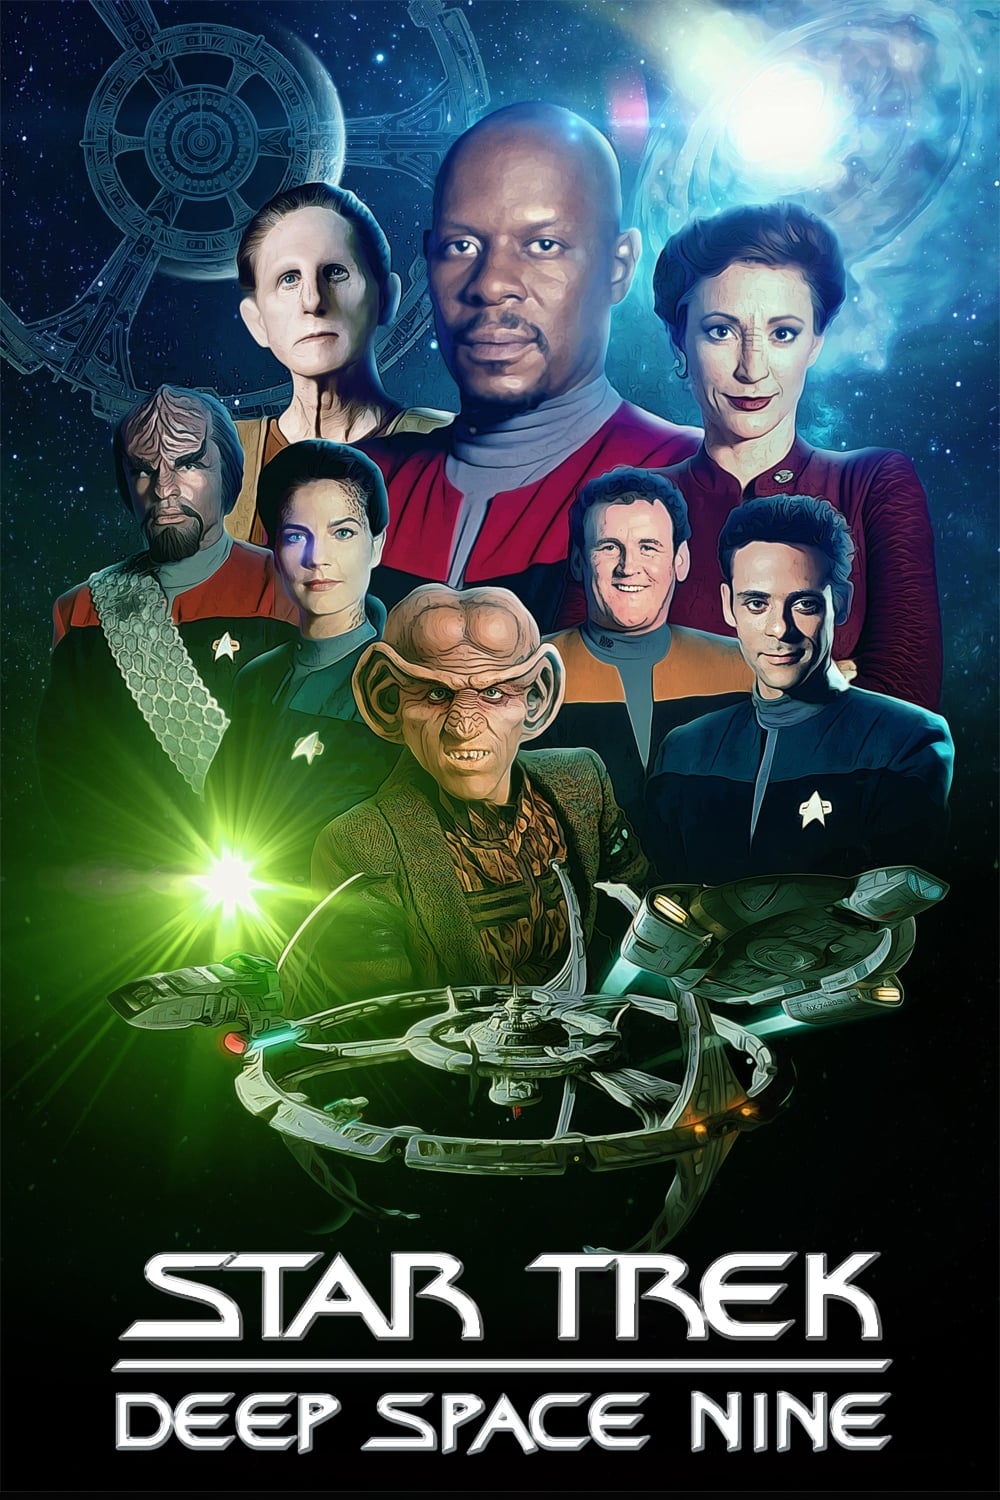 Star Trek: Deep Space Nine TV Shows About Wormhole